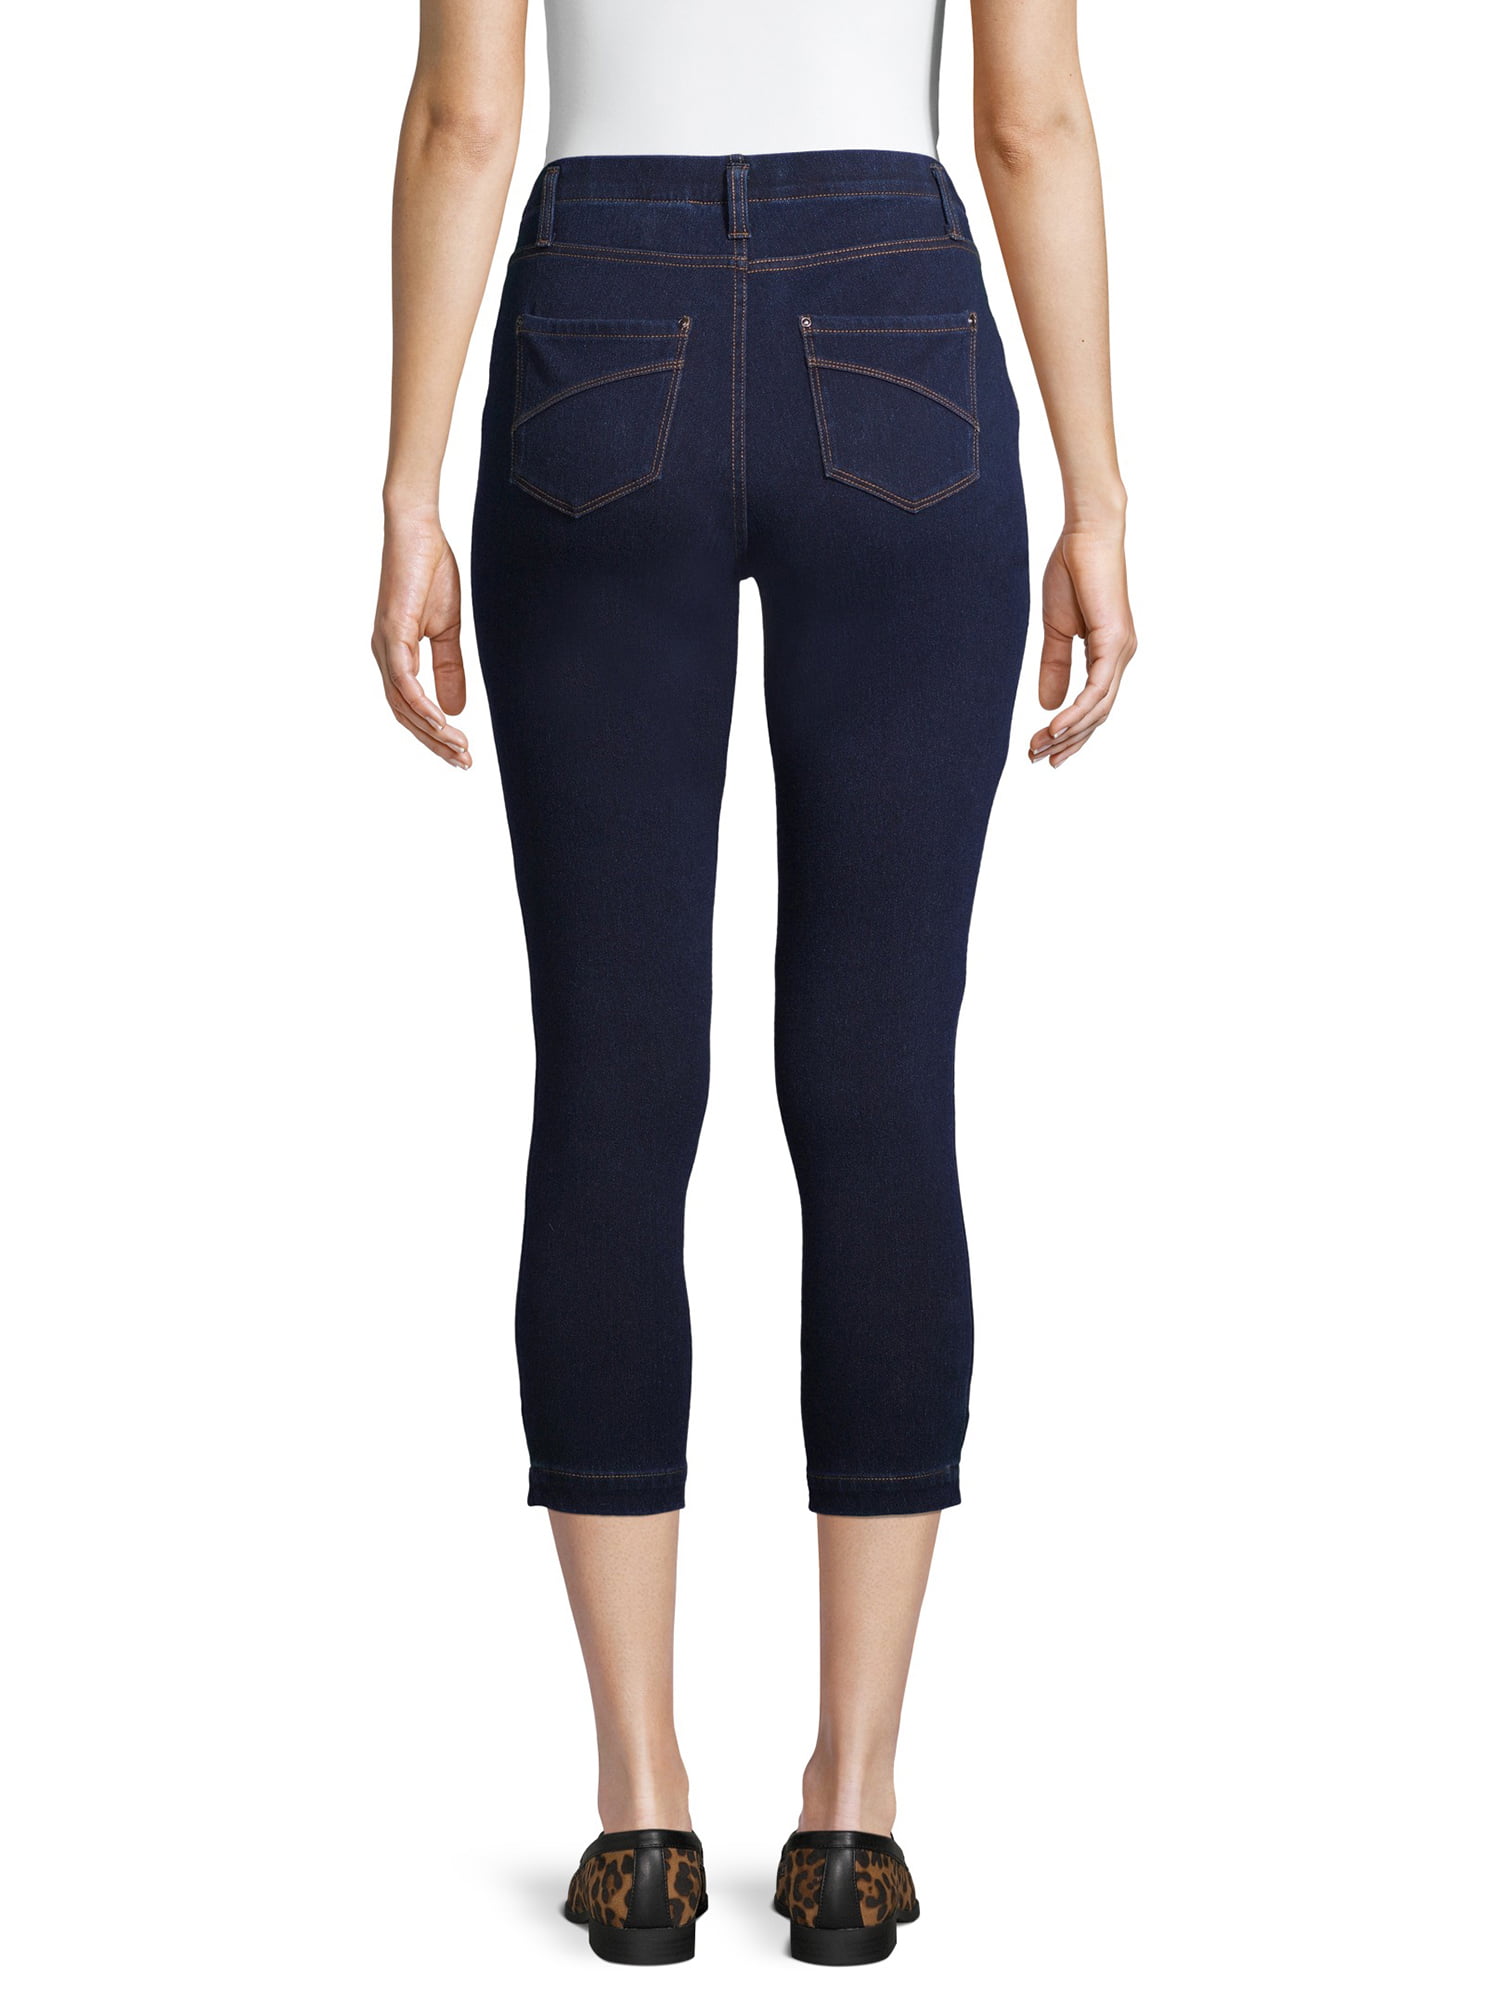 capri jeggings - OFF-53% >Free Delivery